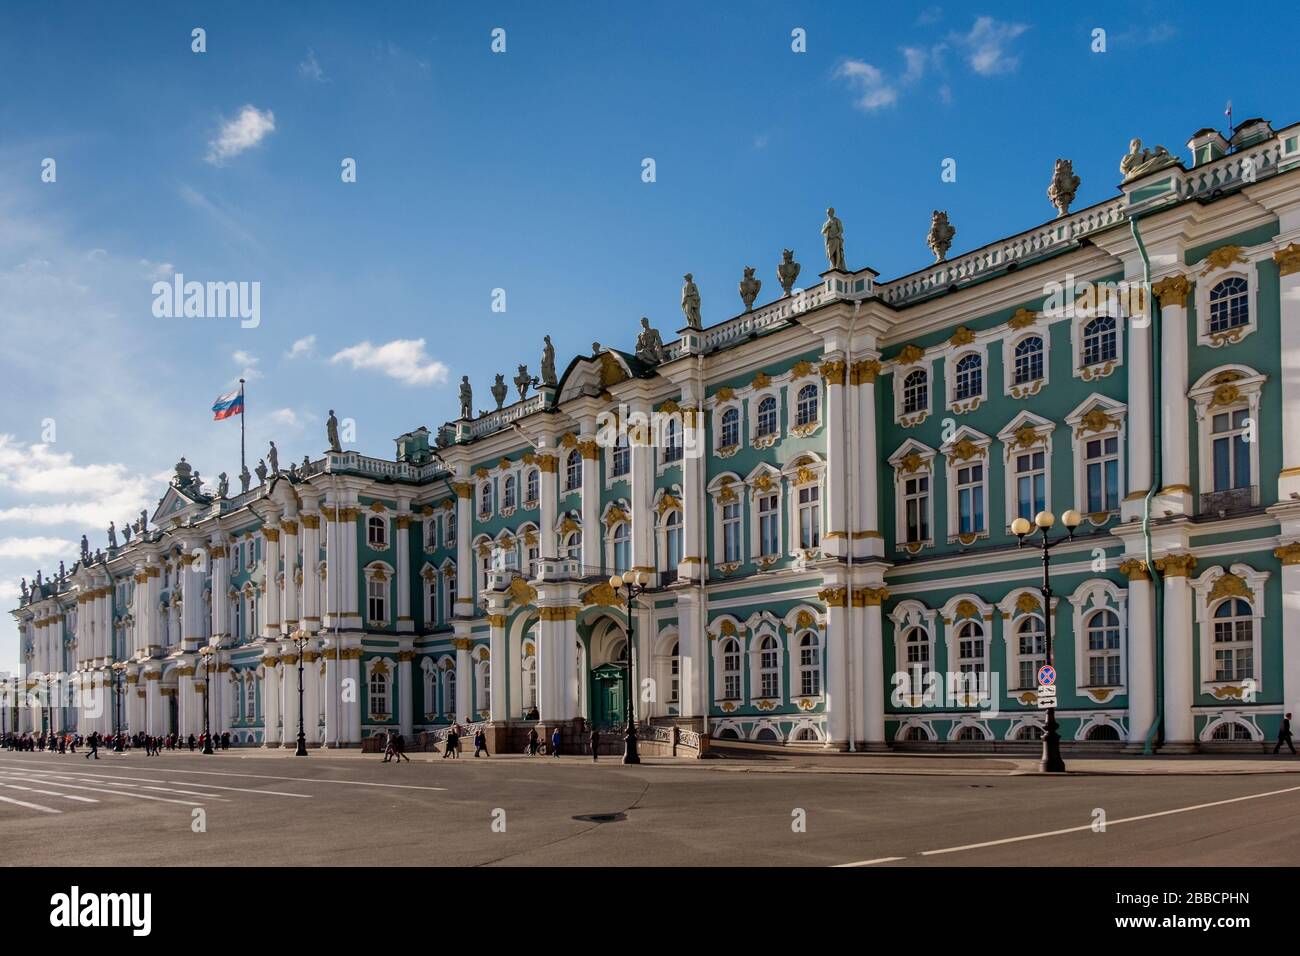 St. Petersburg's most famous building, the Winter Palace, now part of the Hermitage art museum. St Petersburg Russia Stock Photo